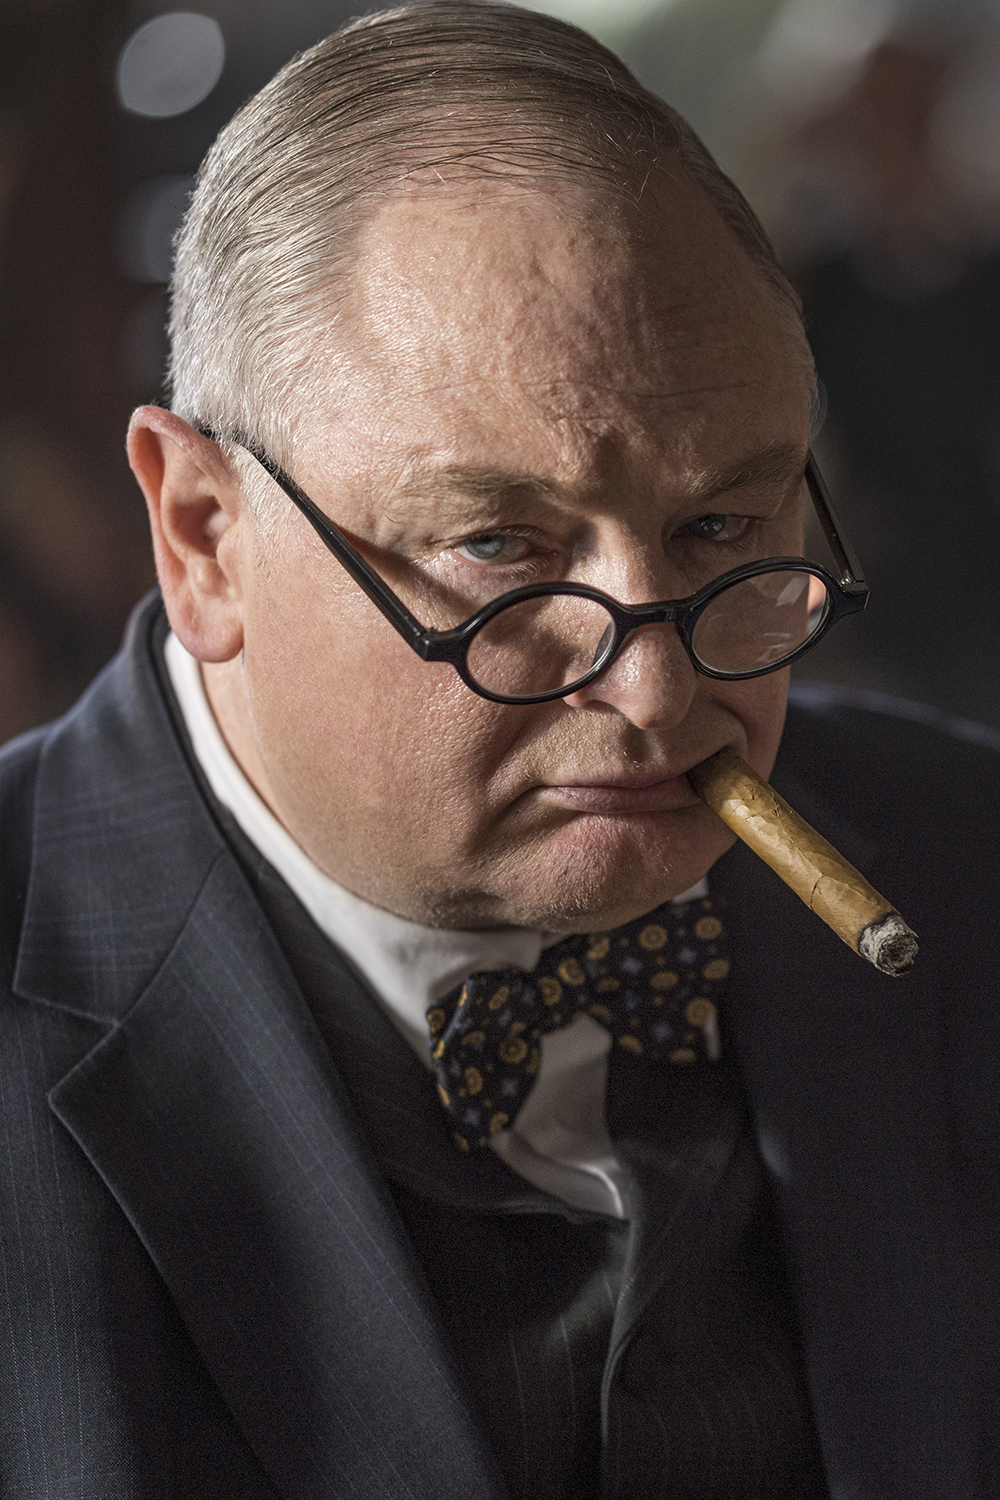 A photo of actor Adrian Galley portraying Winston Churchill